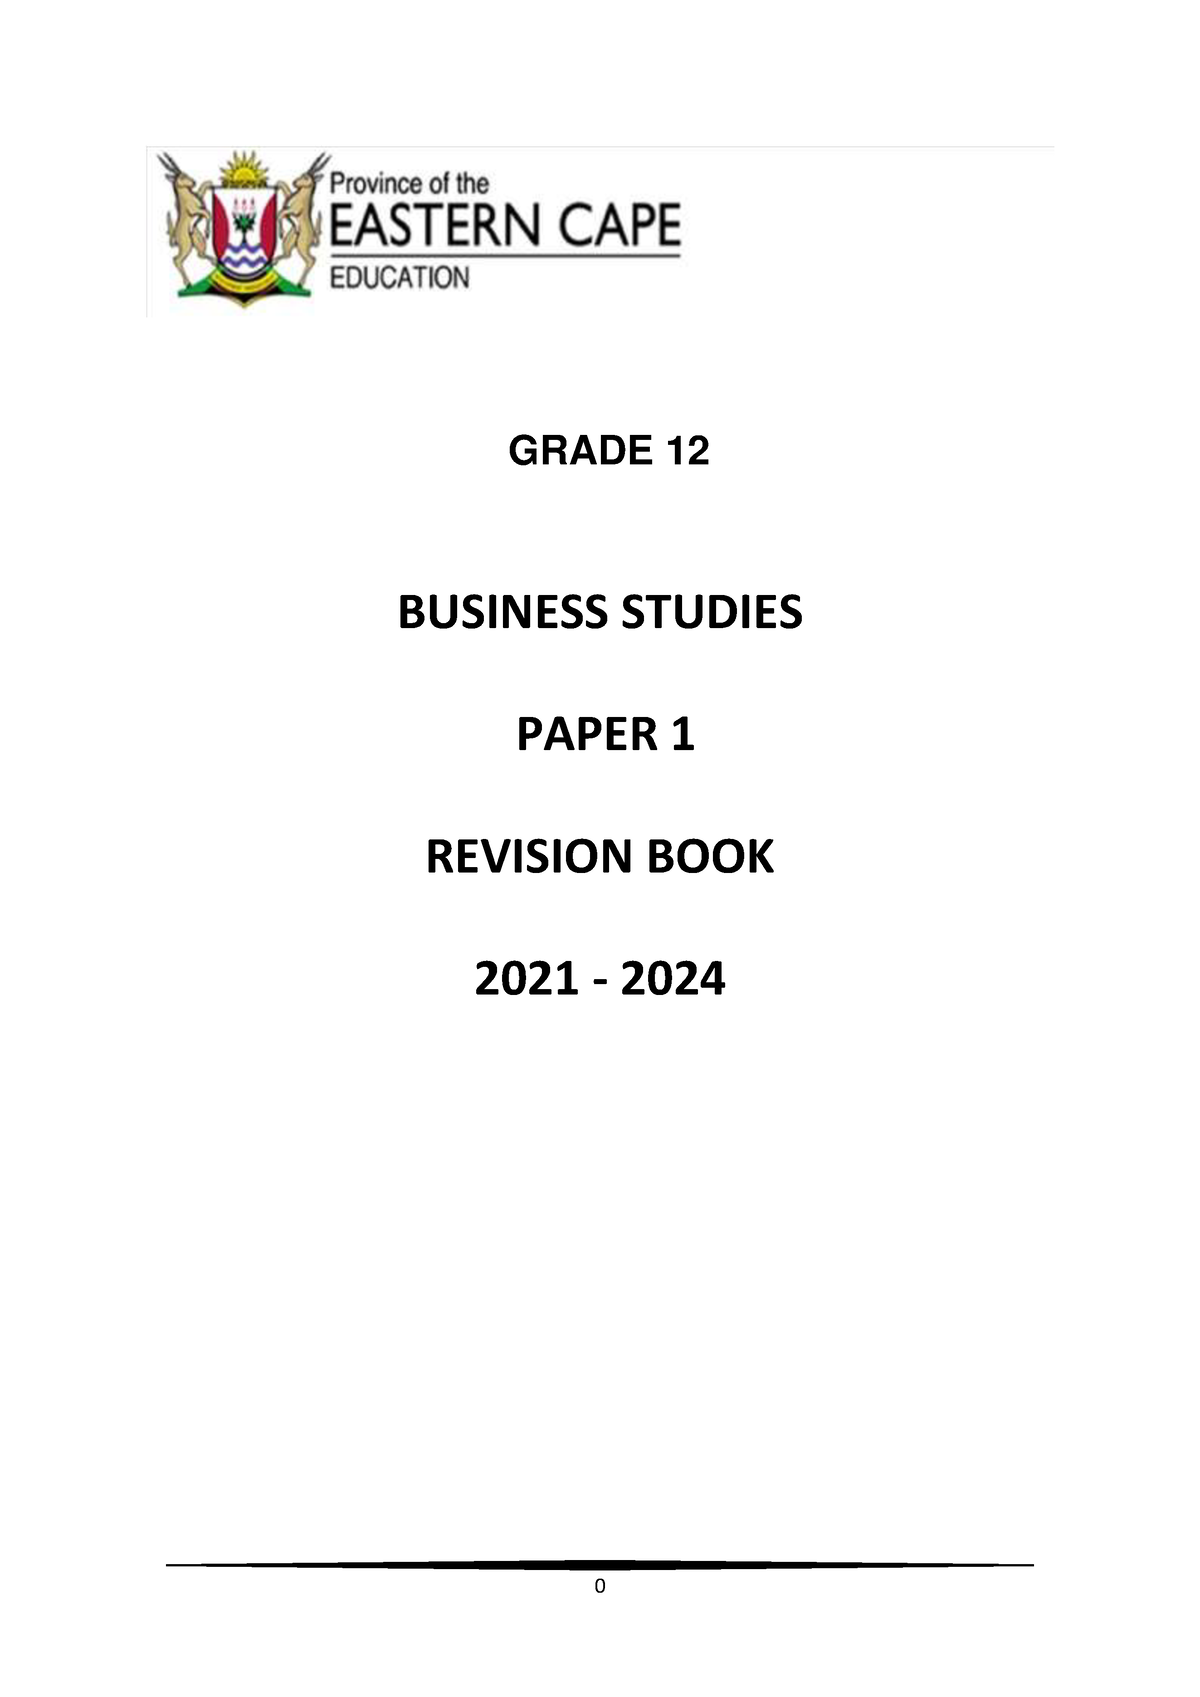 possible essays for business studies paper 1 grade 12